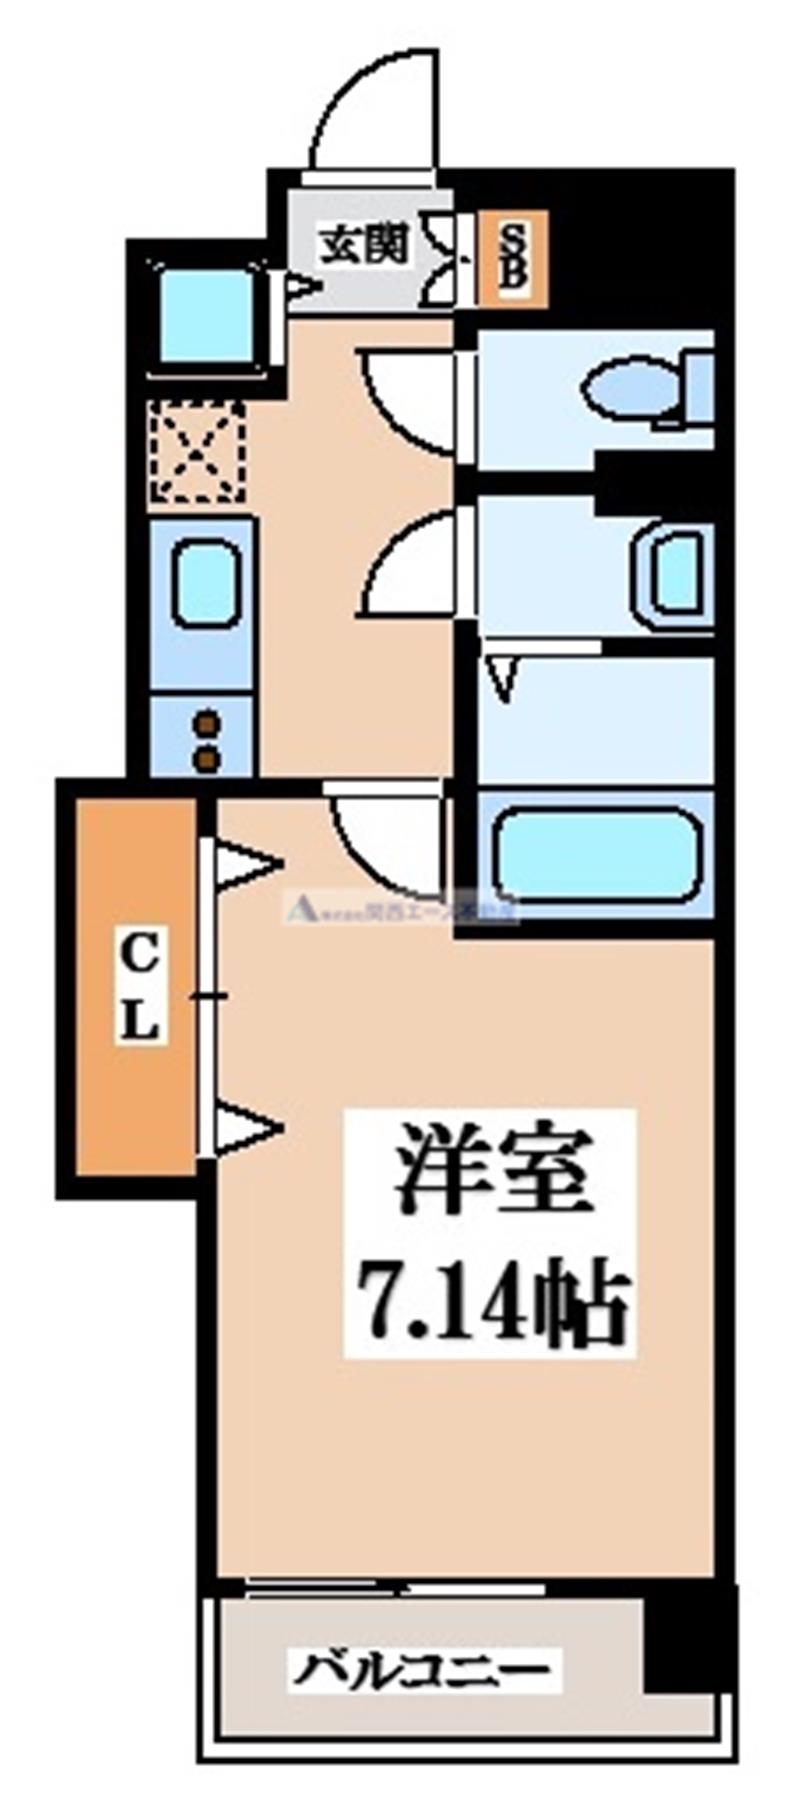 Luxe布施駅前の間取り